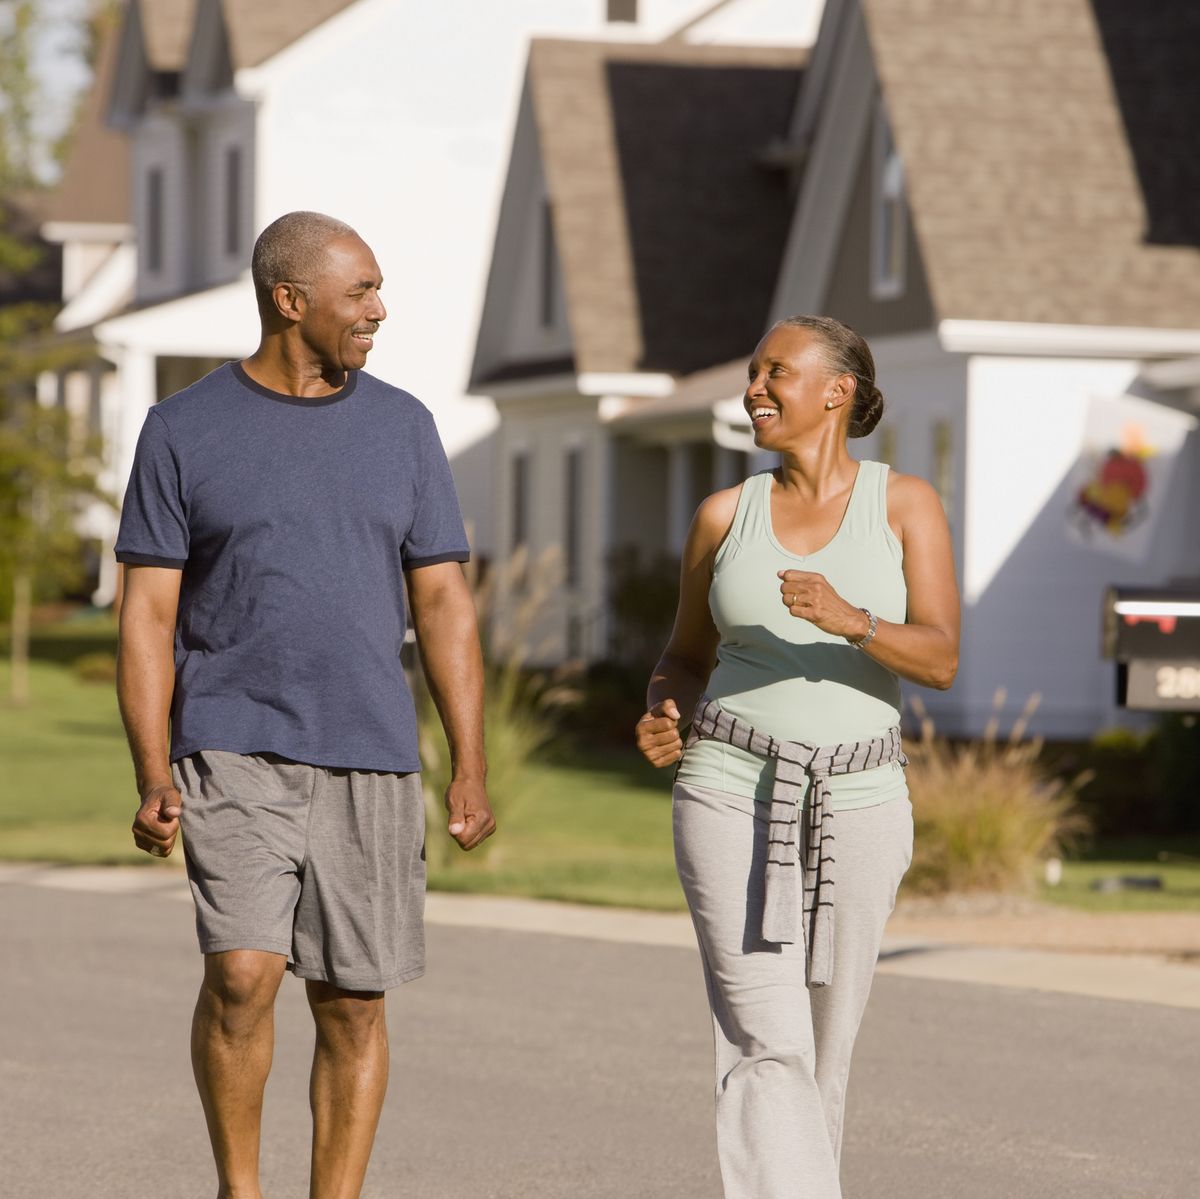 Walking for Weight Loss - Benefits of Walking